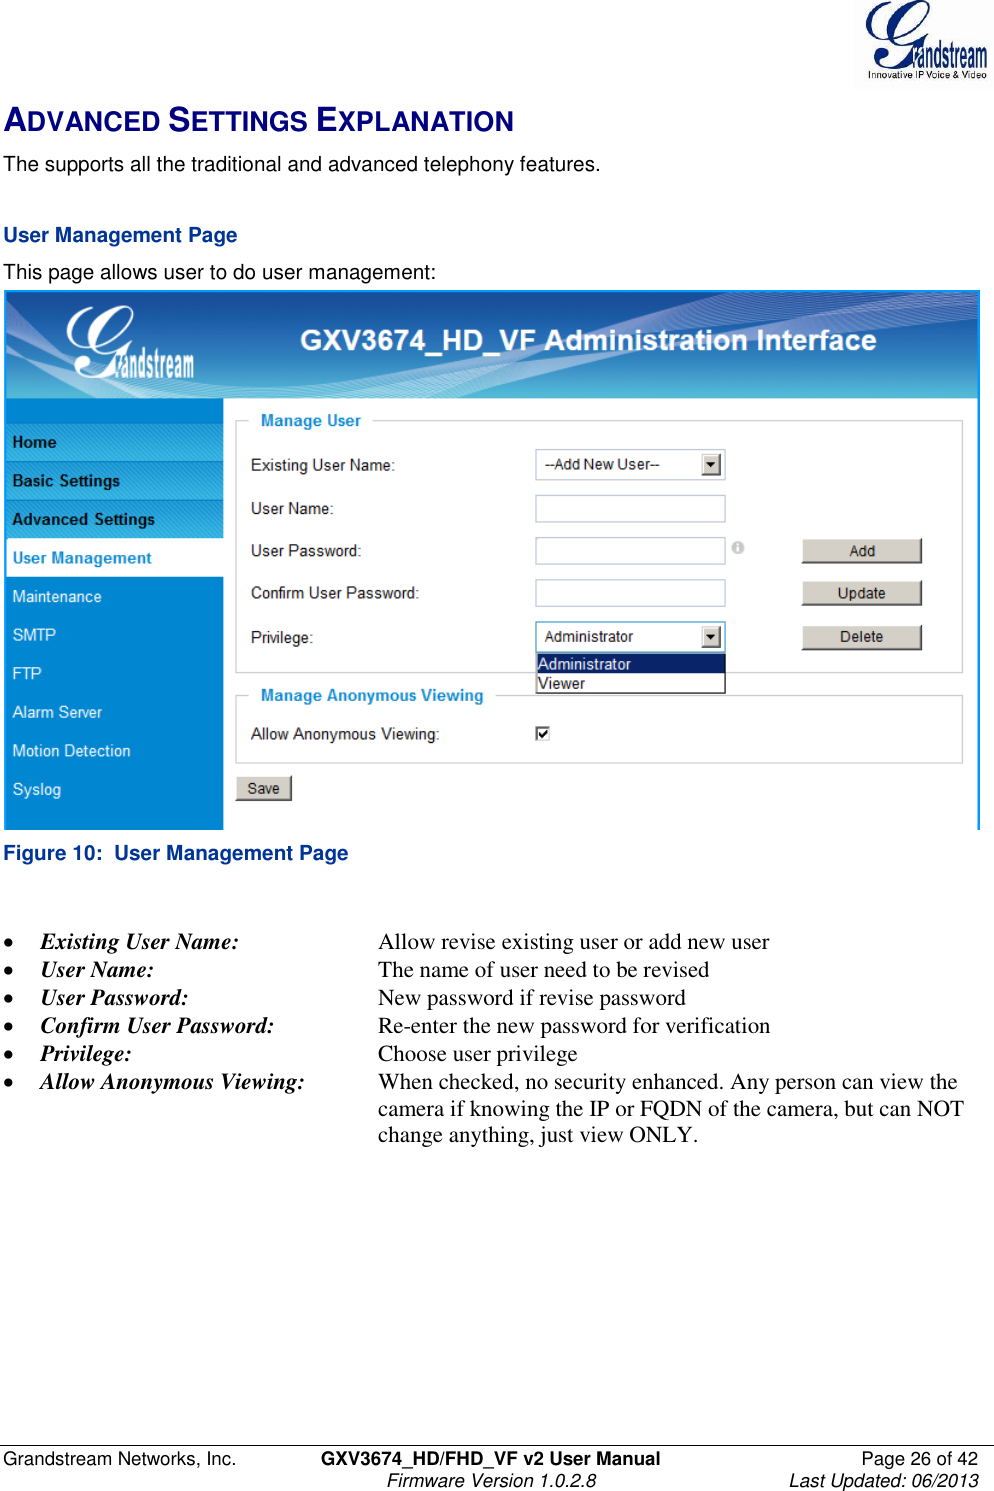  Grandstream Networks, Inc.  GXV3674_HD/FHD_VF v2 User Manual  Page 26 of 42   Firmware Version 1.0.2.8  Last Updated: 06/2013  ADVANCED SETTINGS EXPLANATION The supports all the traditional and advanced telephony features.     User Management Page This page allows user to do user management:  Figure 10:  User Management Page   Existing User Name:    Allow revise existing user or add new user  User Name:      The name of user need to be revised  User Password:      New password if revise password  Confirm User Password:    Re-enter the new password for verification  Privilege:        Choose user privilege  Allow Anonymous Viewing:  When checked, no security enhanced. Any person can view the            camera if knowing the IP or FQDN of the camera, but can NOT            change anything, just view ONLY.   